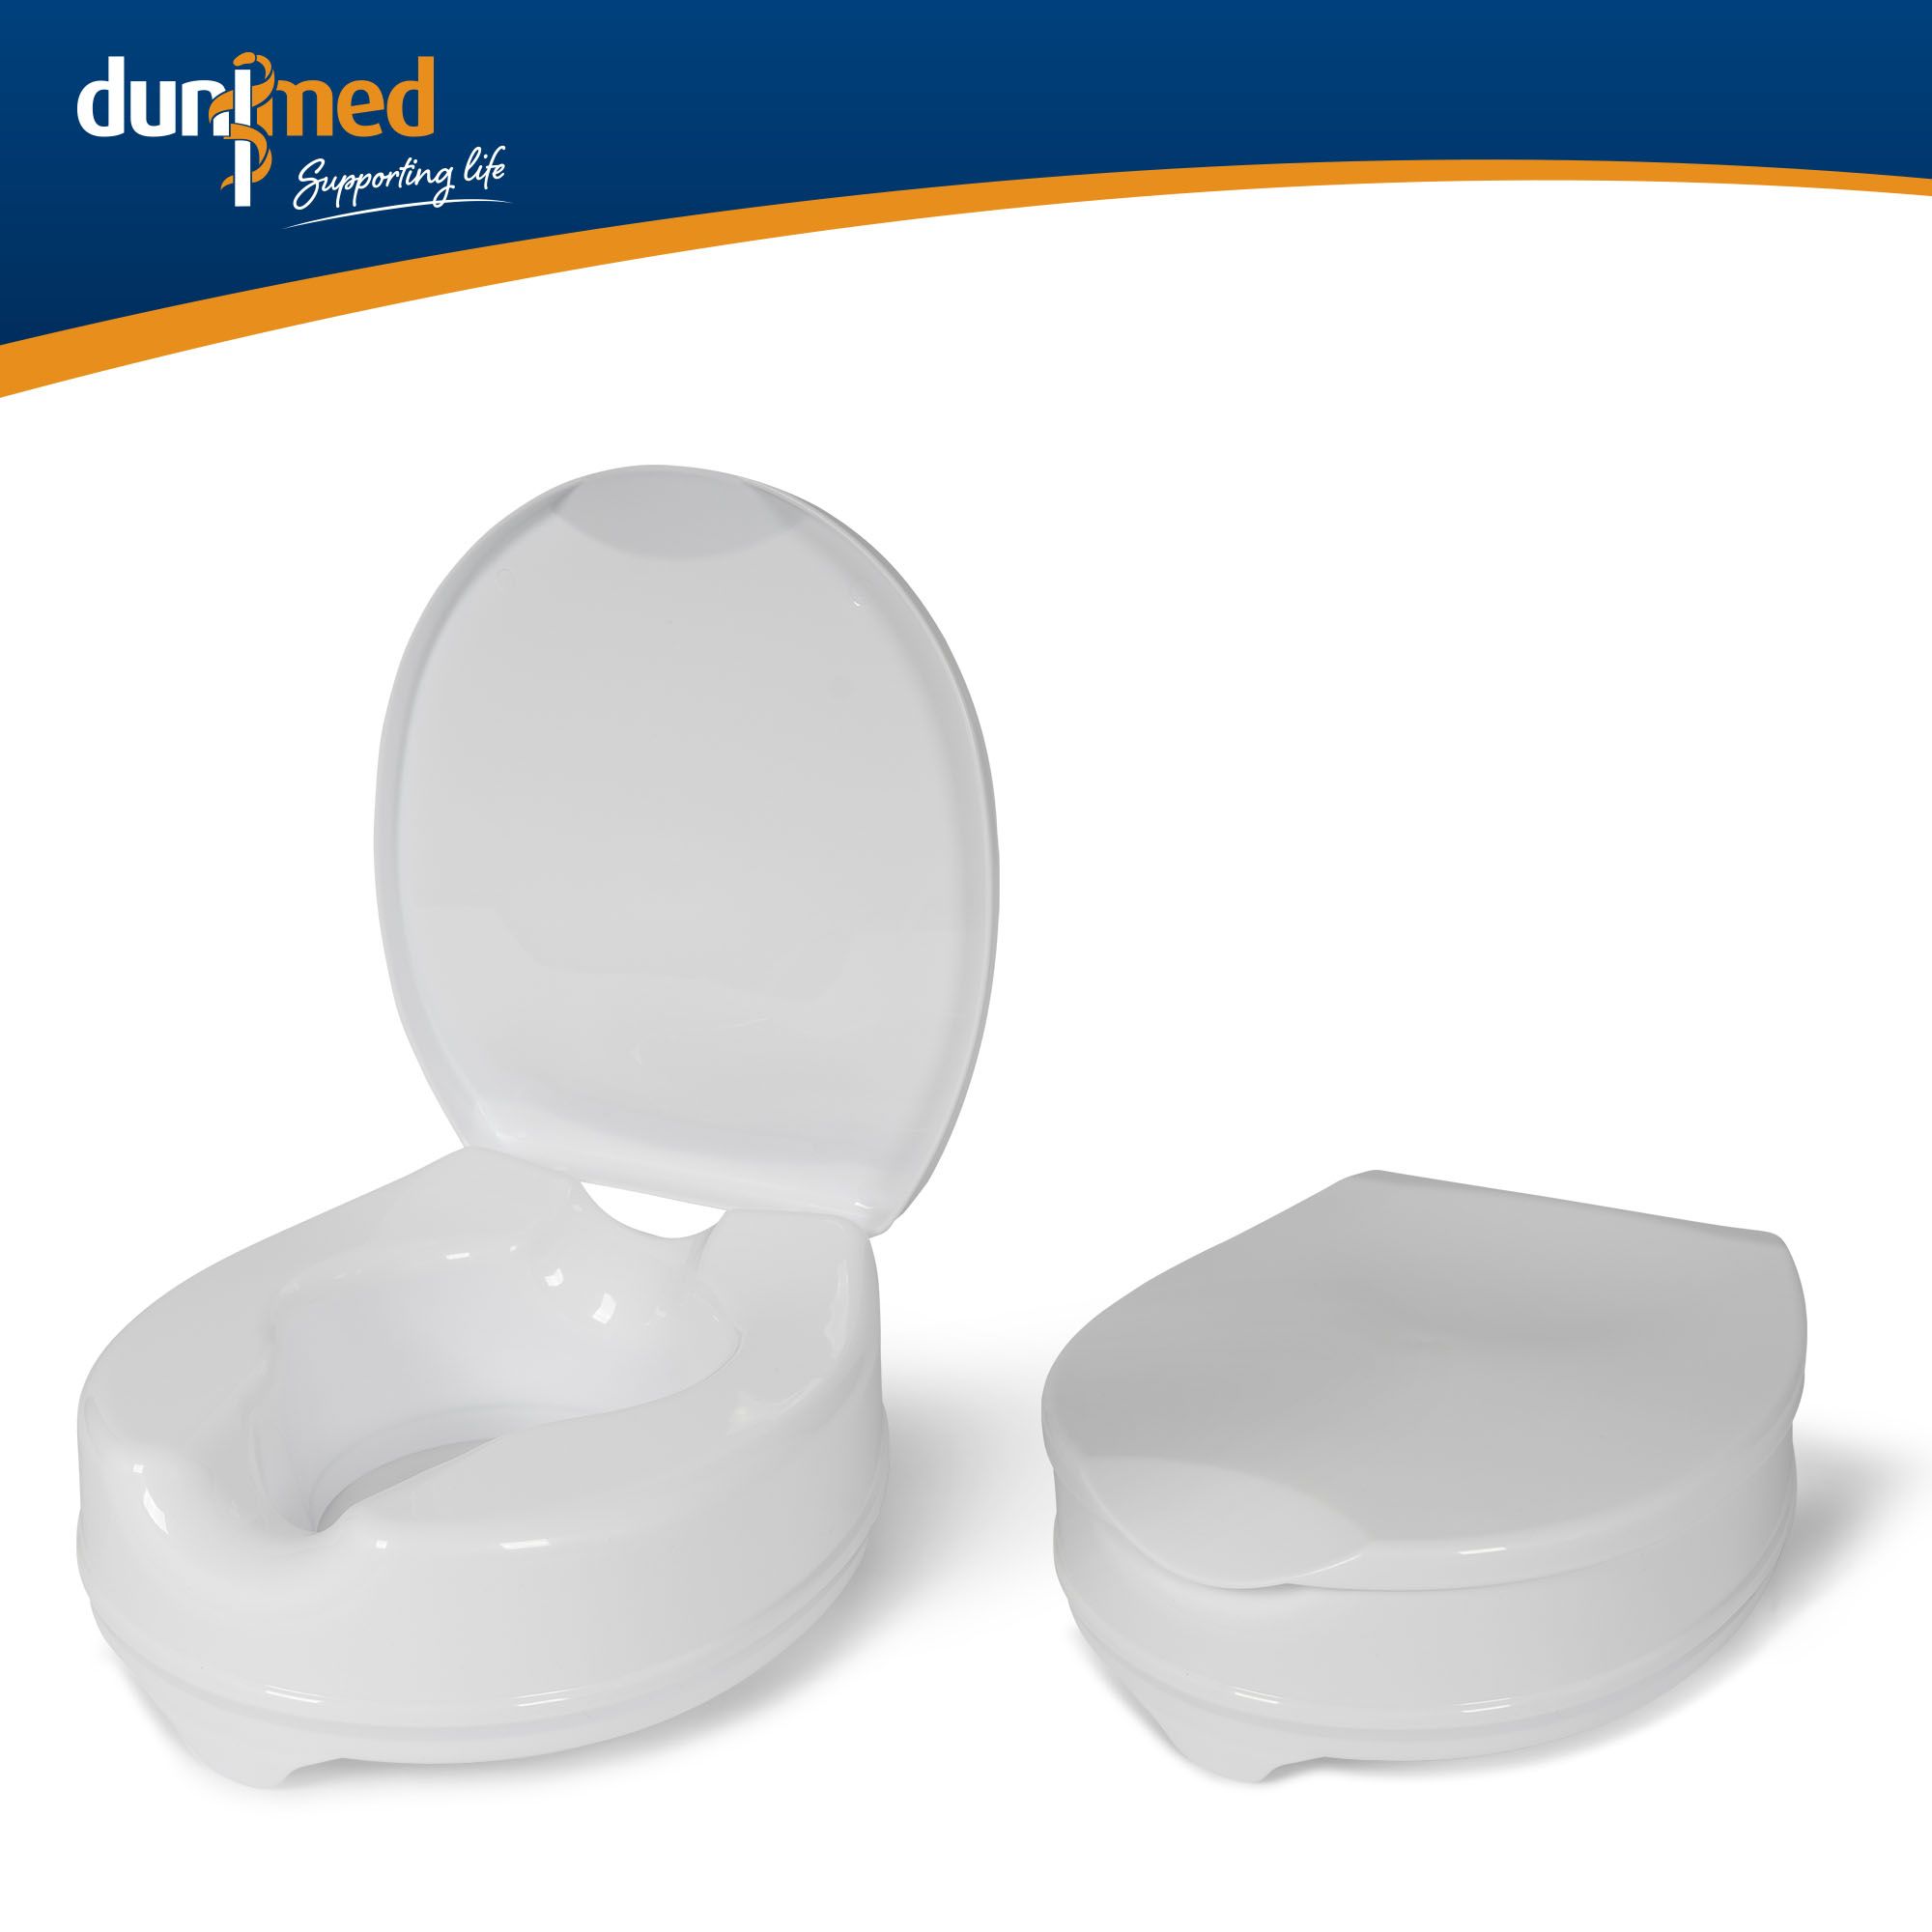 dunimed raised toilet seat lid open and lid closed